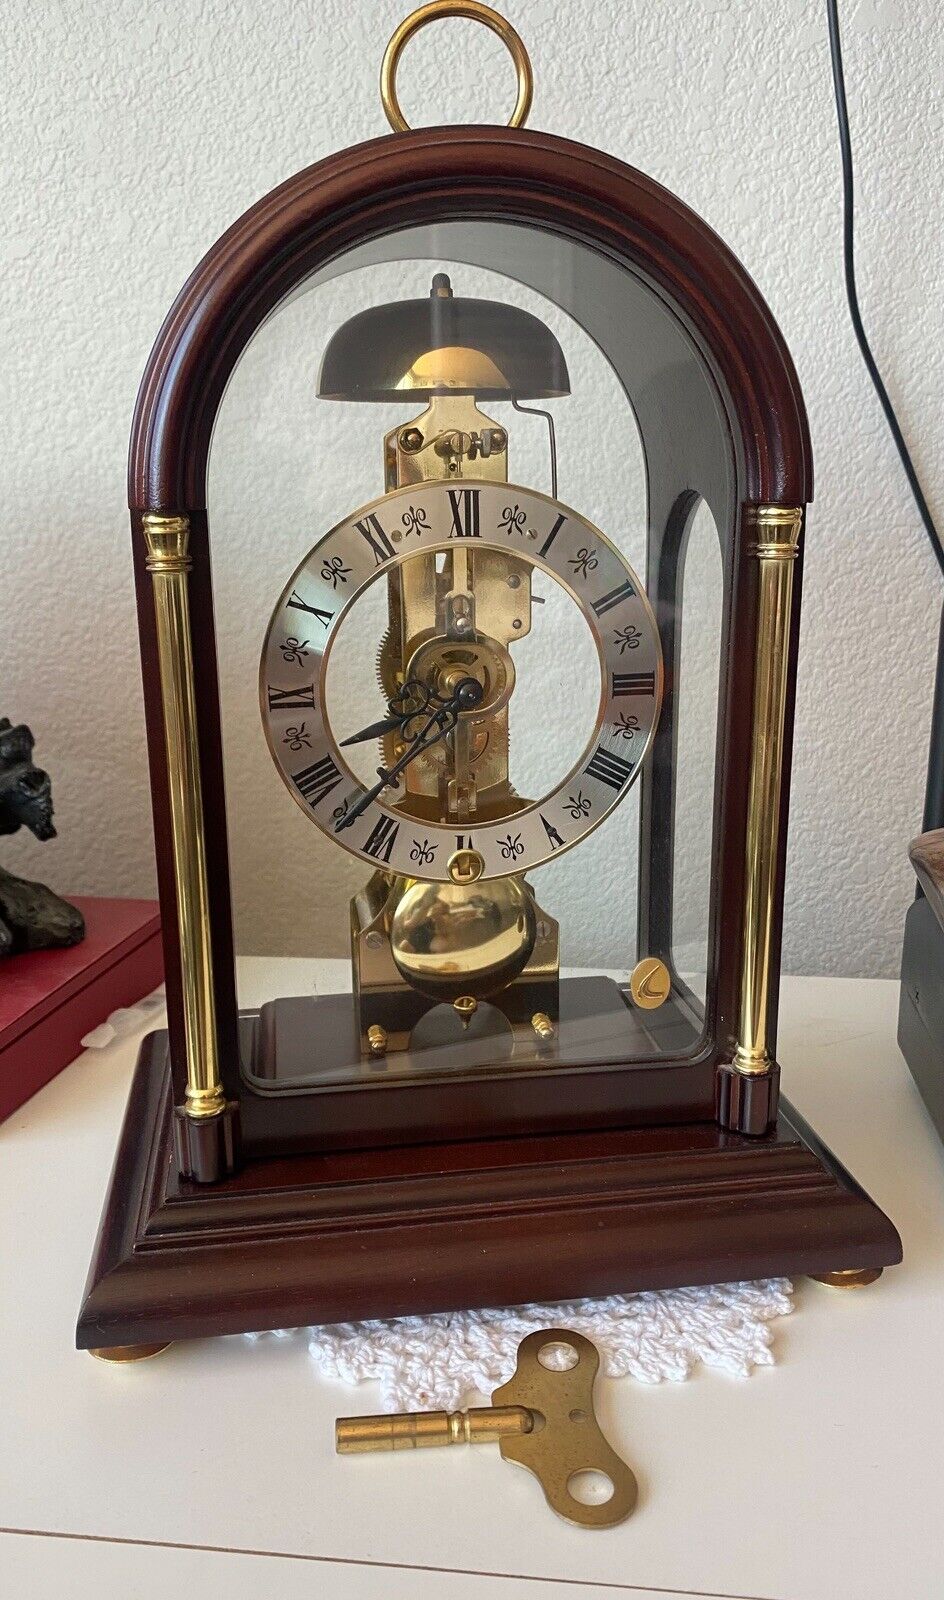 Franz Hermle Germany Skeleton Mantle Clock 791-081 WORKING And Key Include.